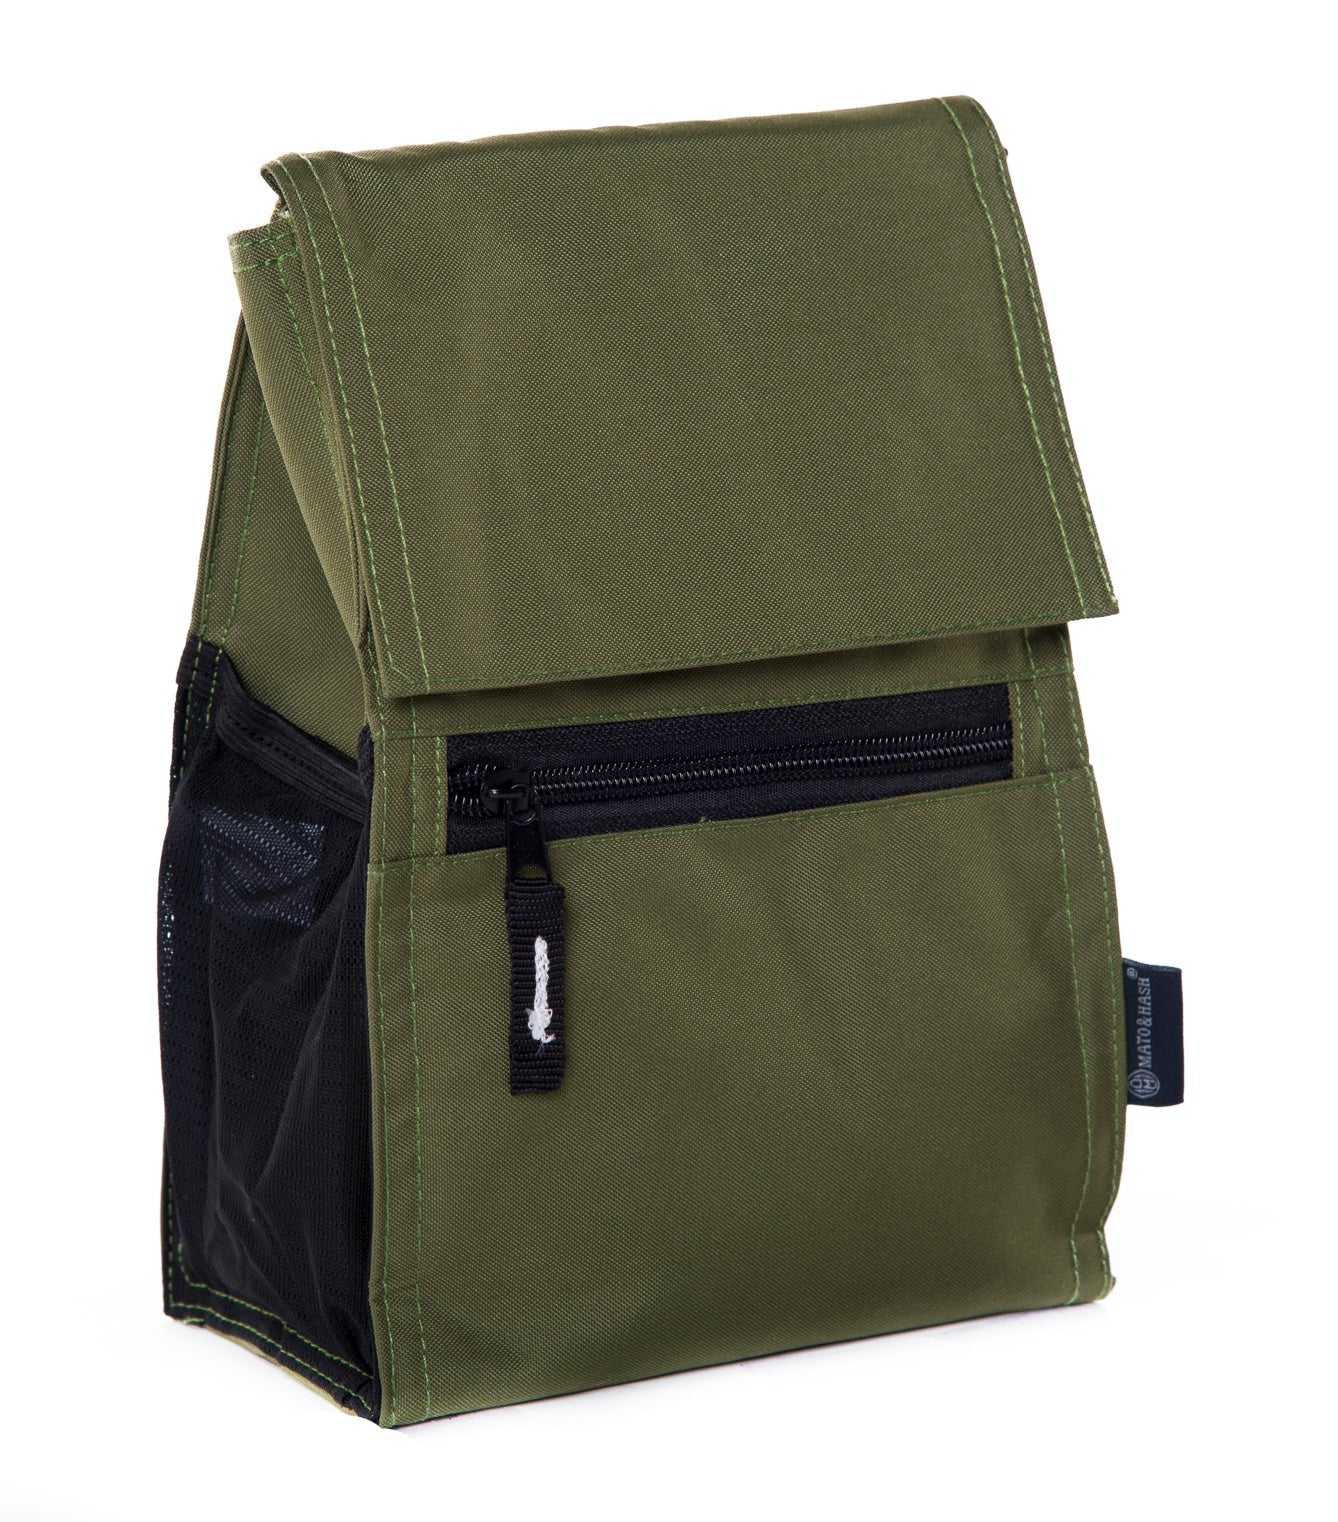 Insulated Lunch Bag w/ Strap and Name Tag - Mato & Hash